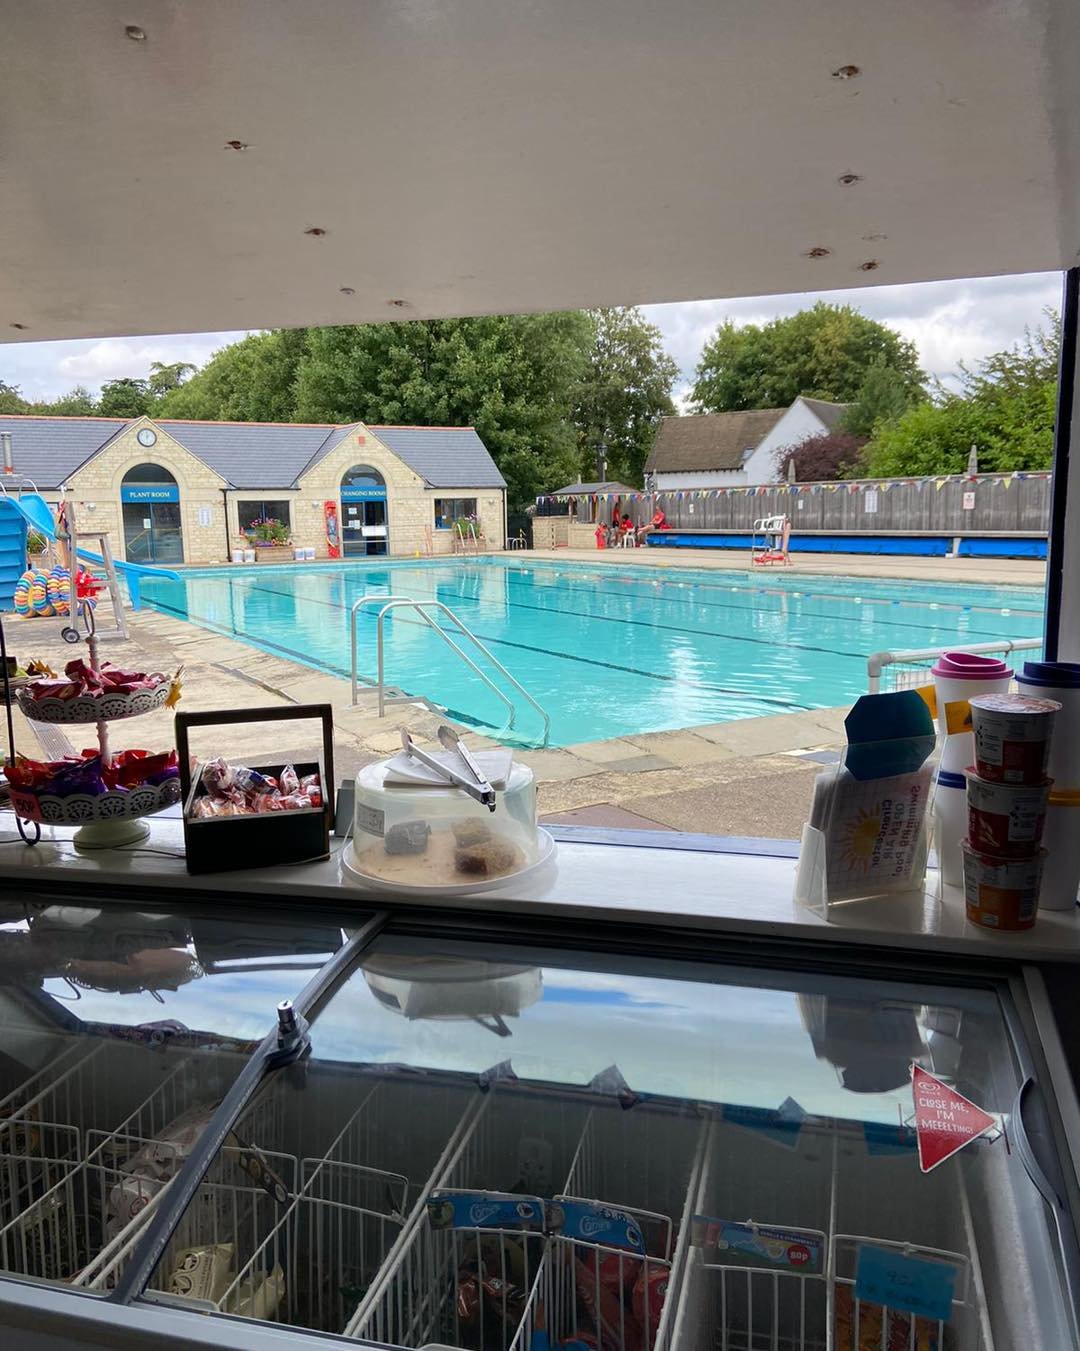 Tuck Shop - Cirencester Open Air Swimming Pool